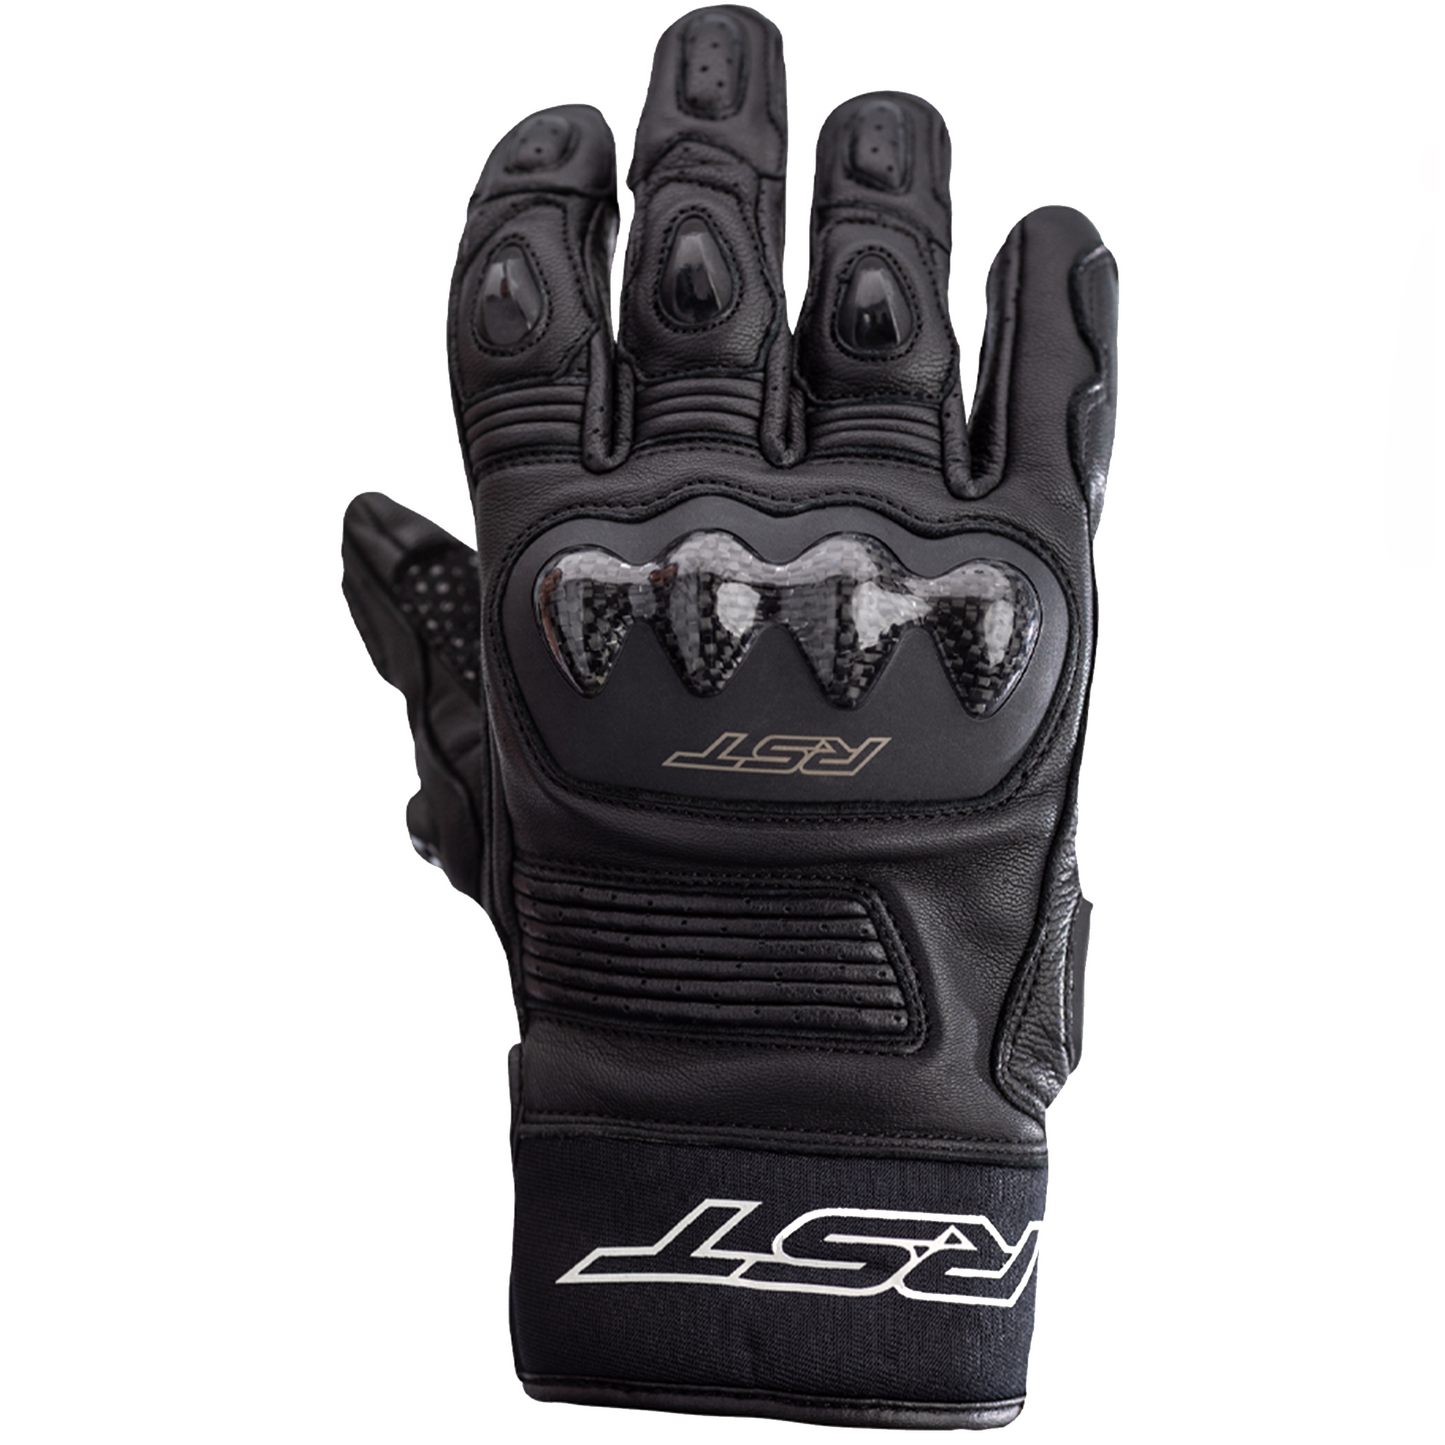 RST Freestyle 2 Leather Riding Gloves - CE APPROVED - Black